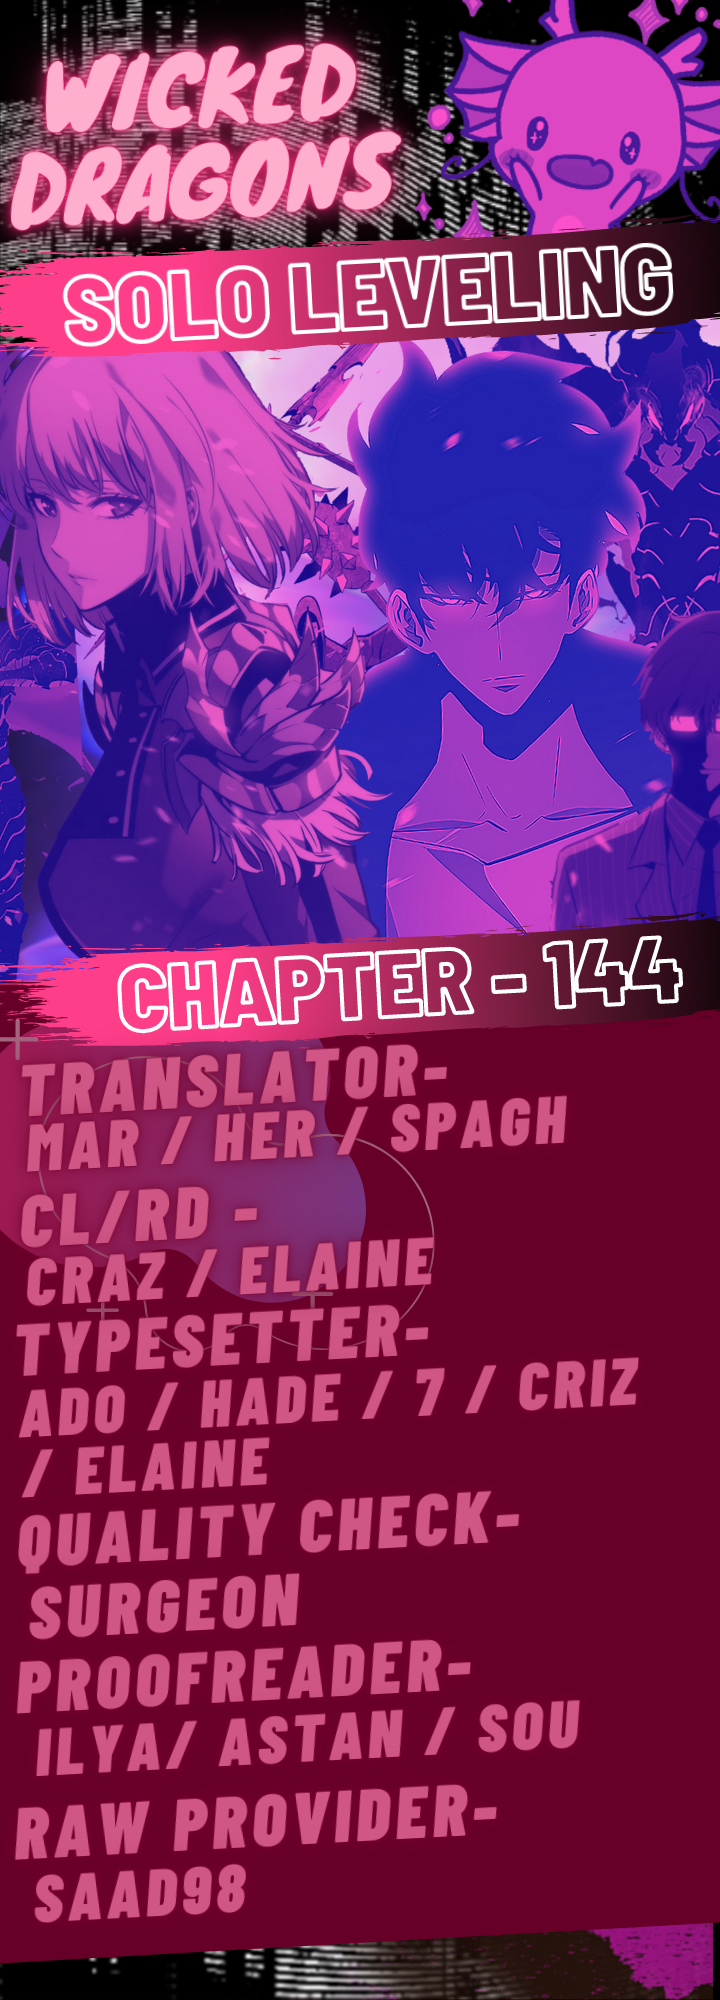 Solo Leveling - Chapter 2900 - Image 1